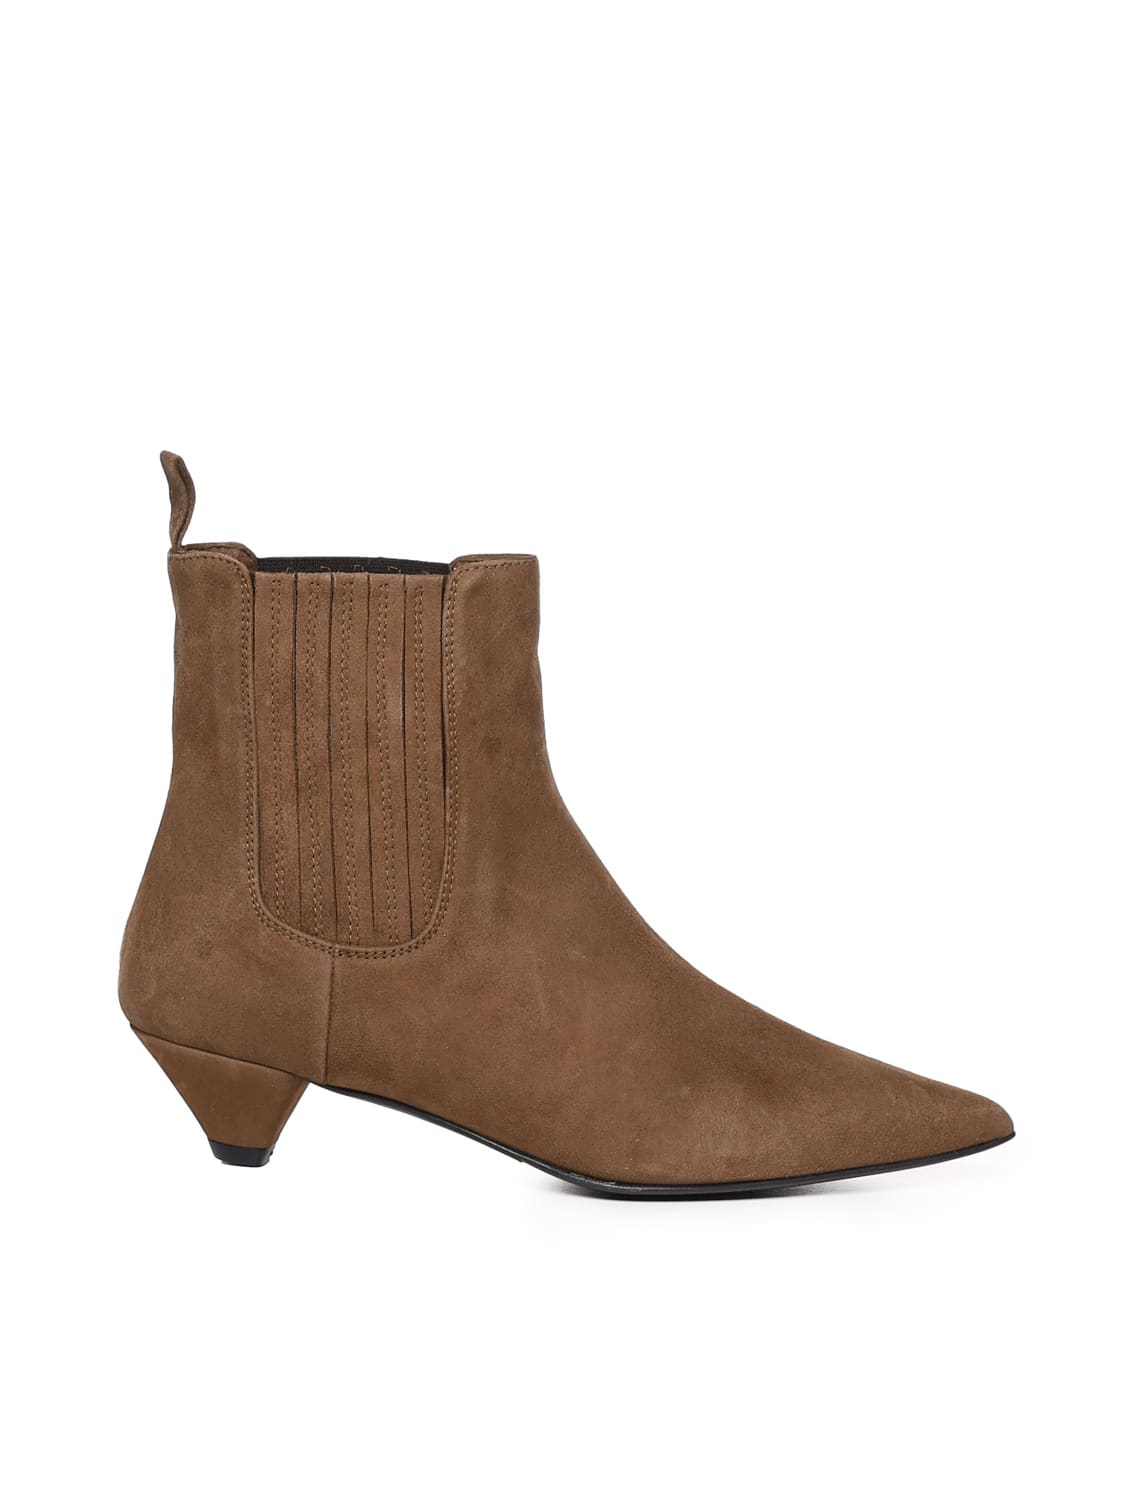 Burnt Suede Ankle Boot